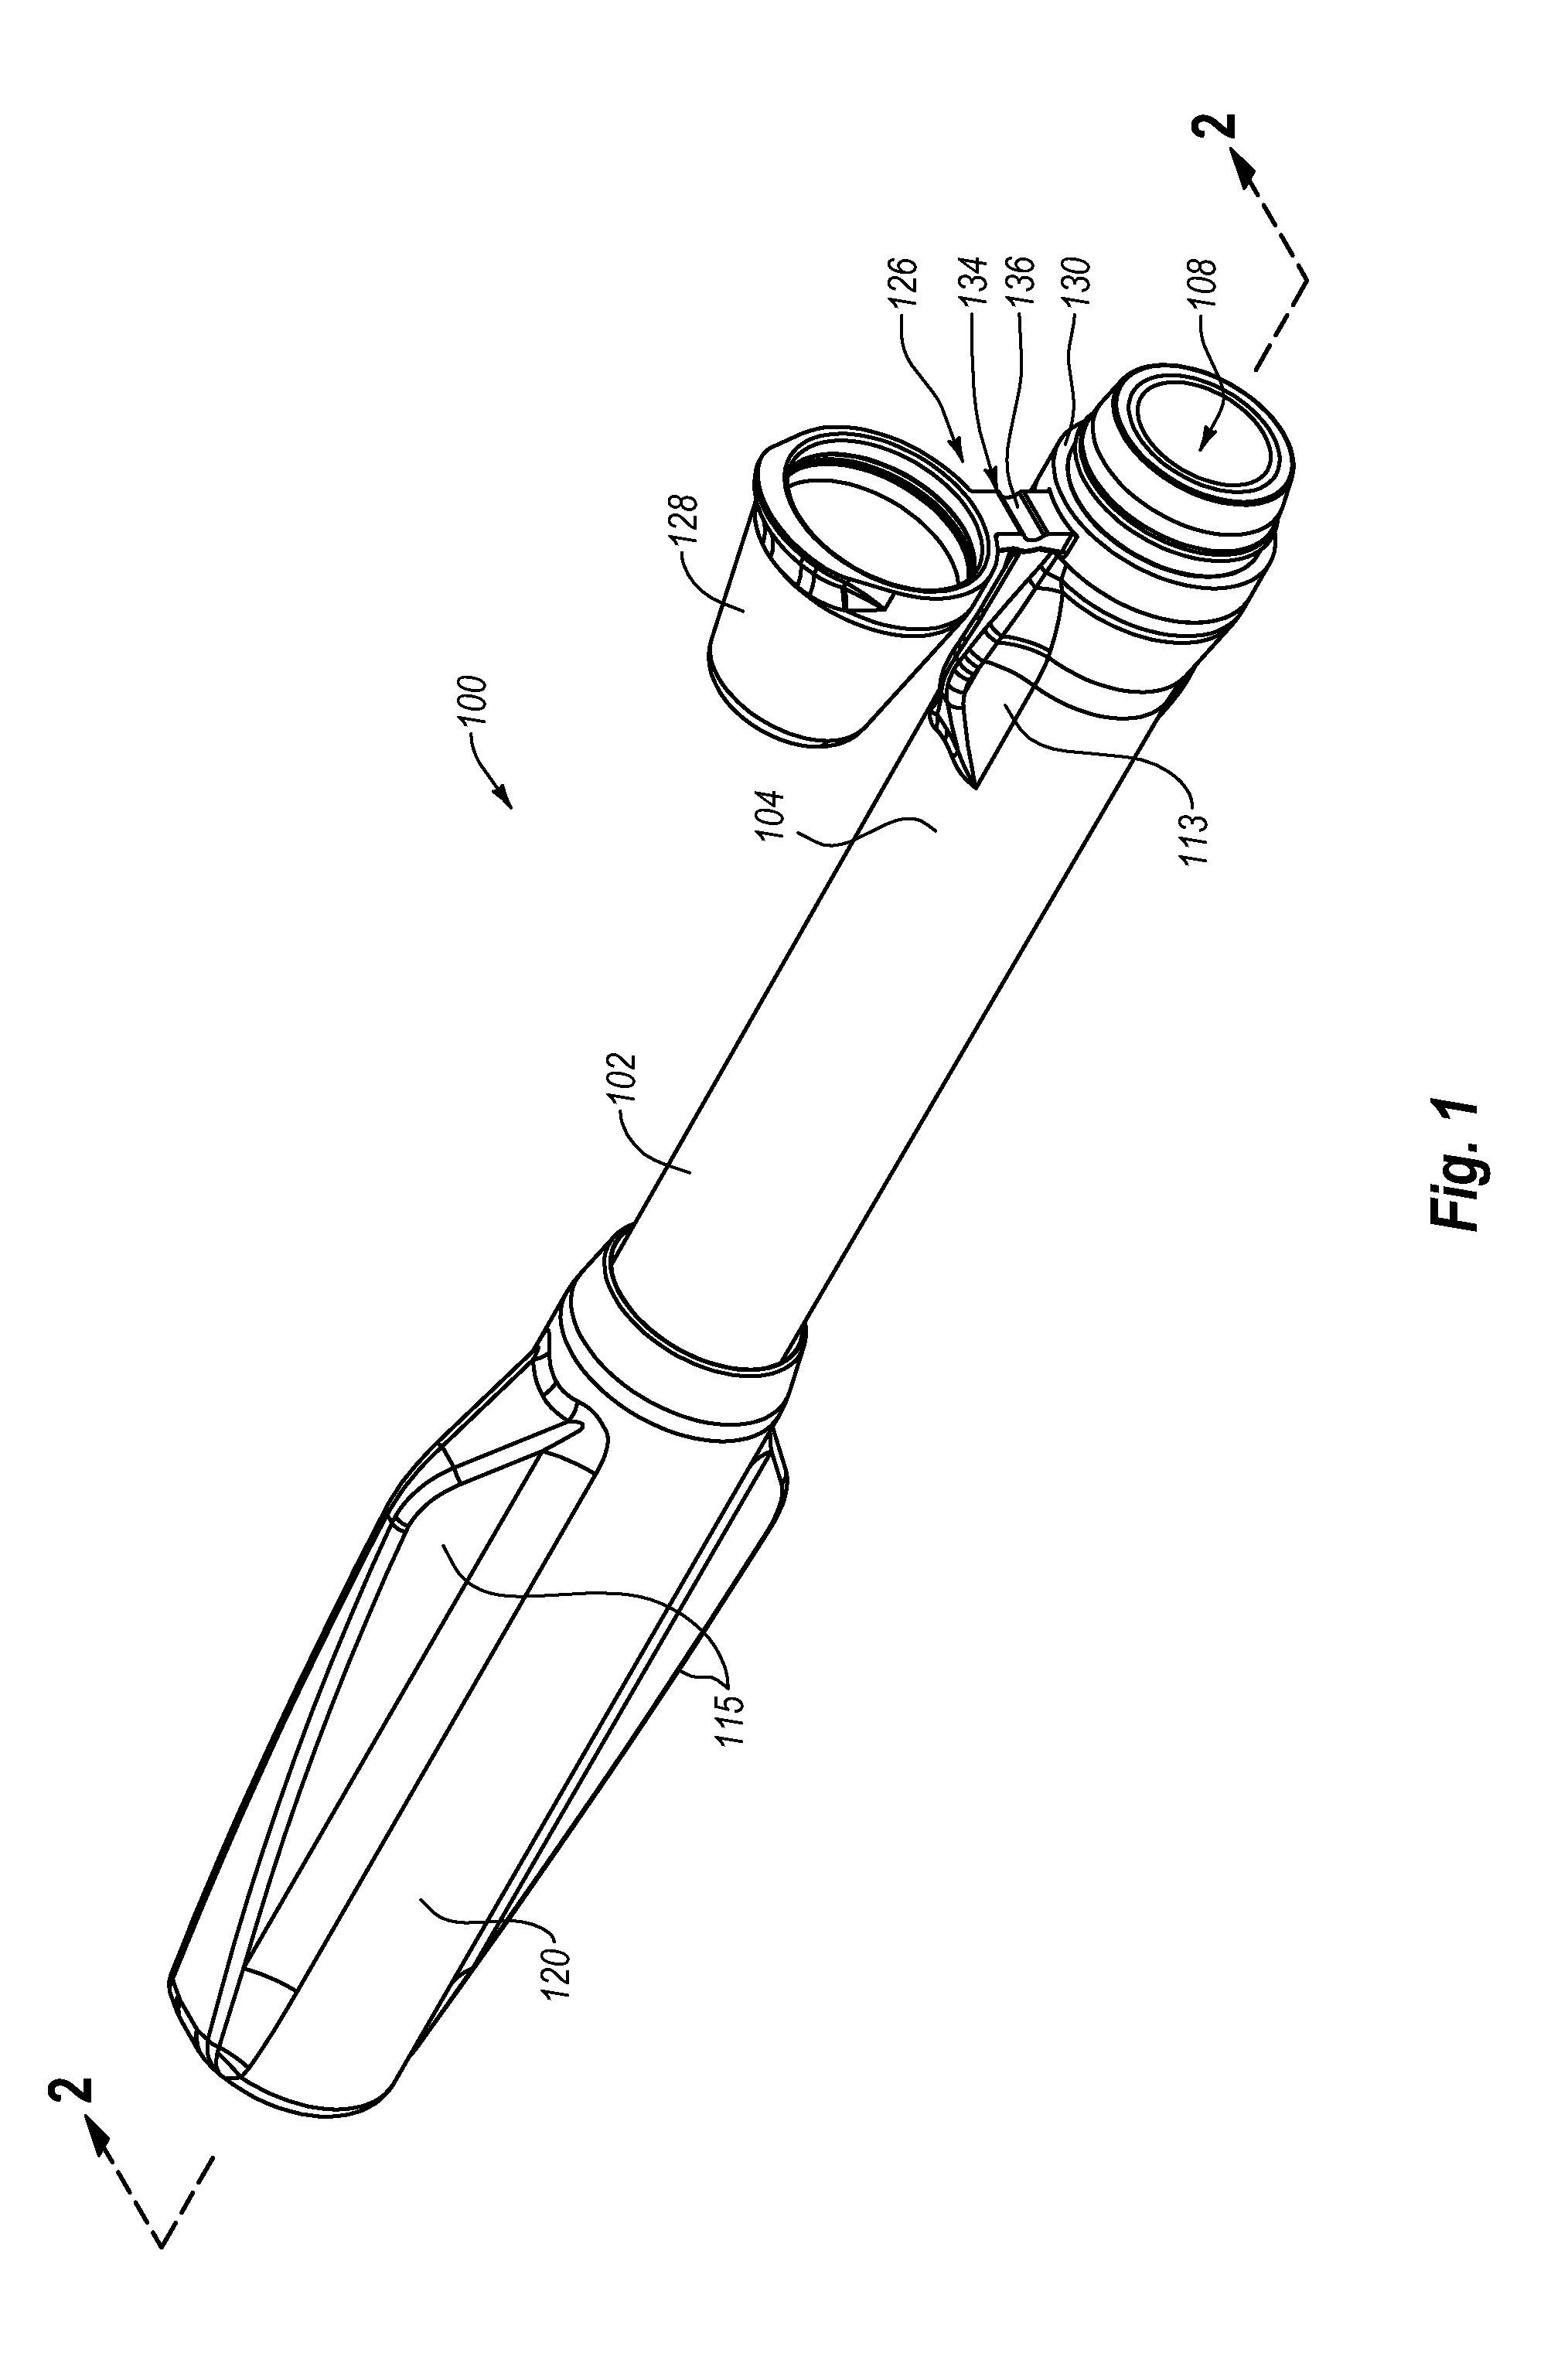 Composite delivery system